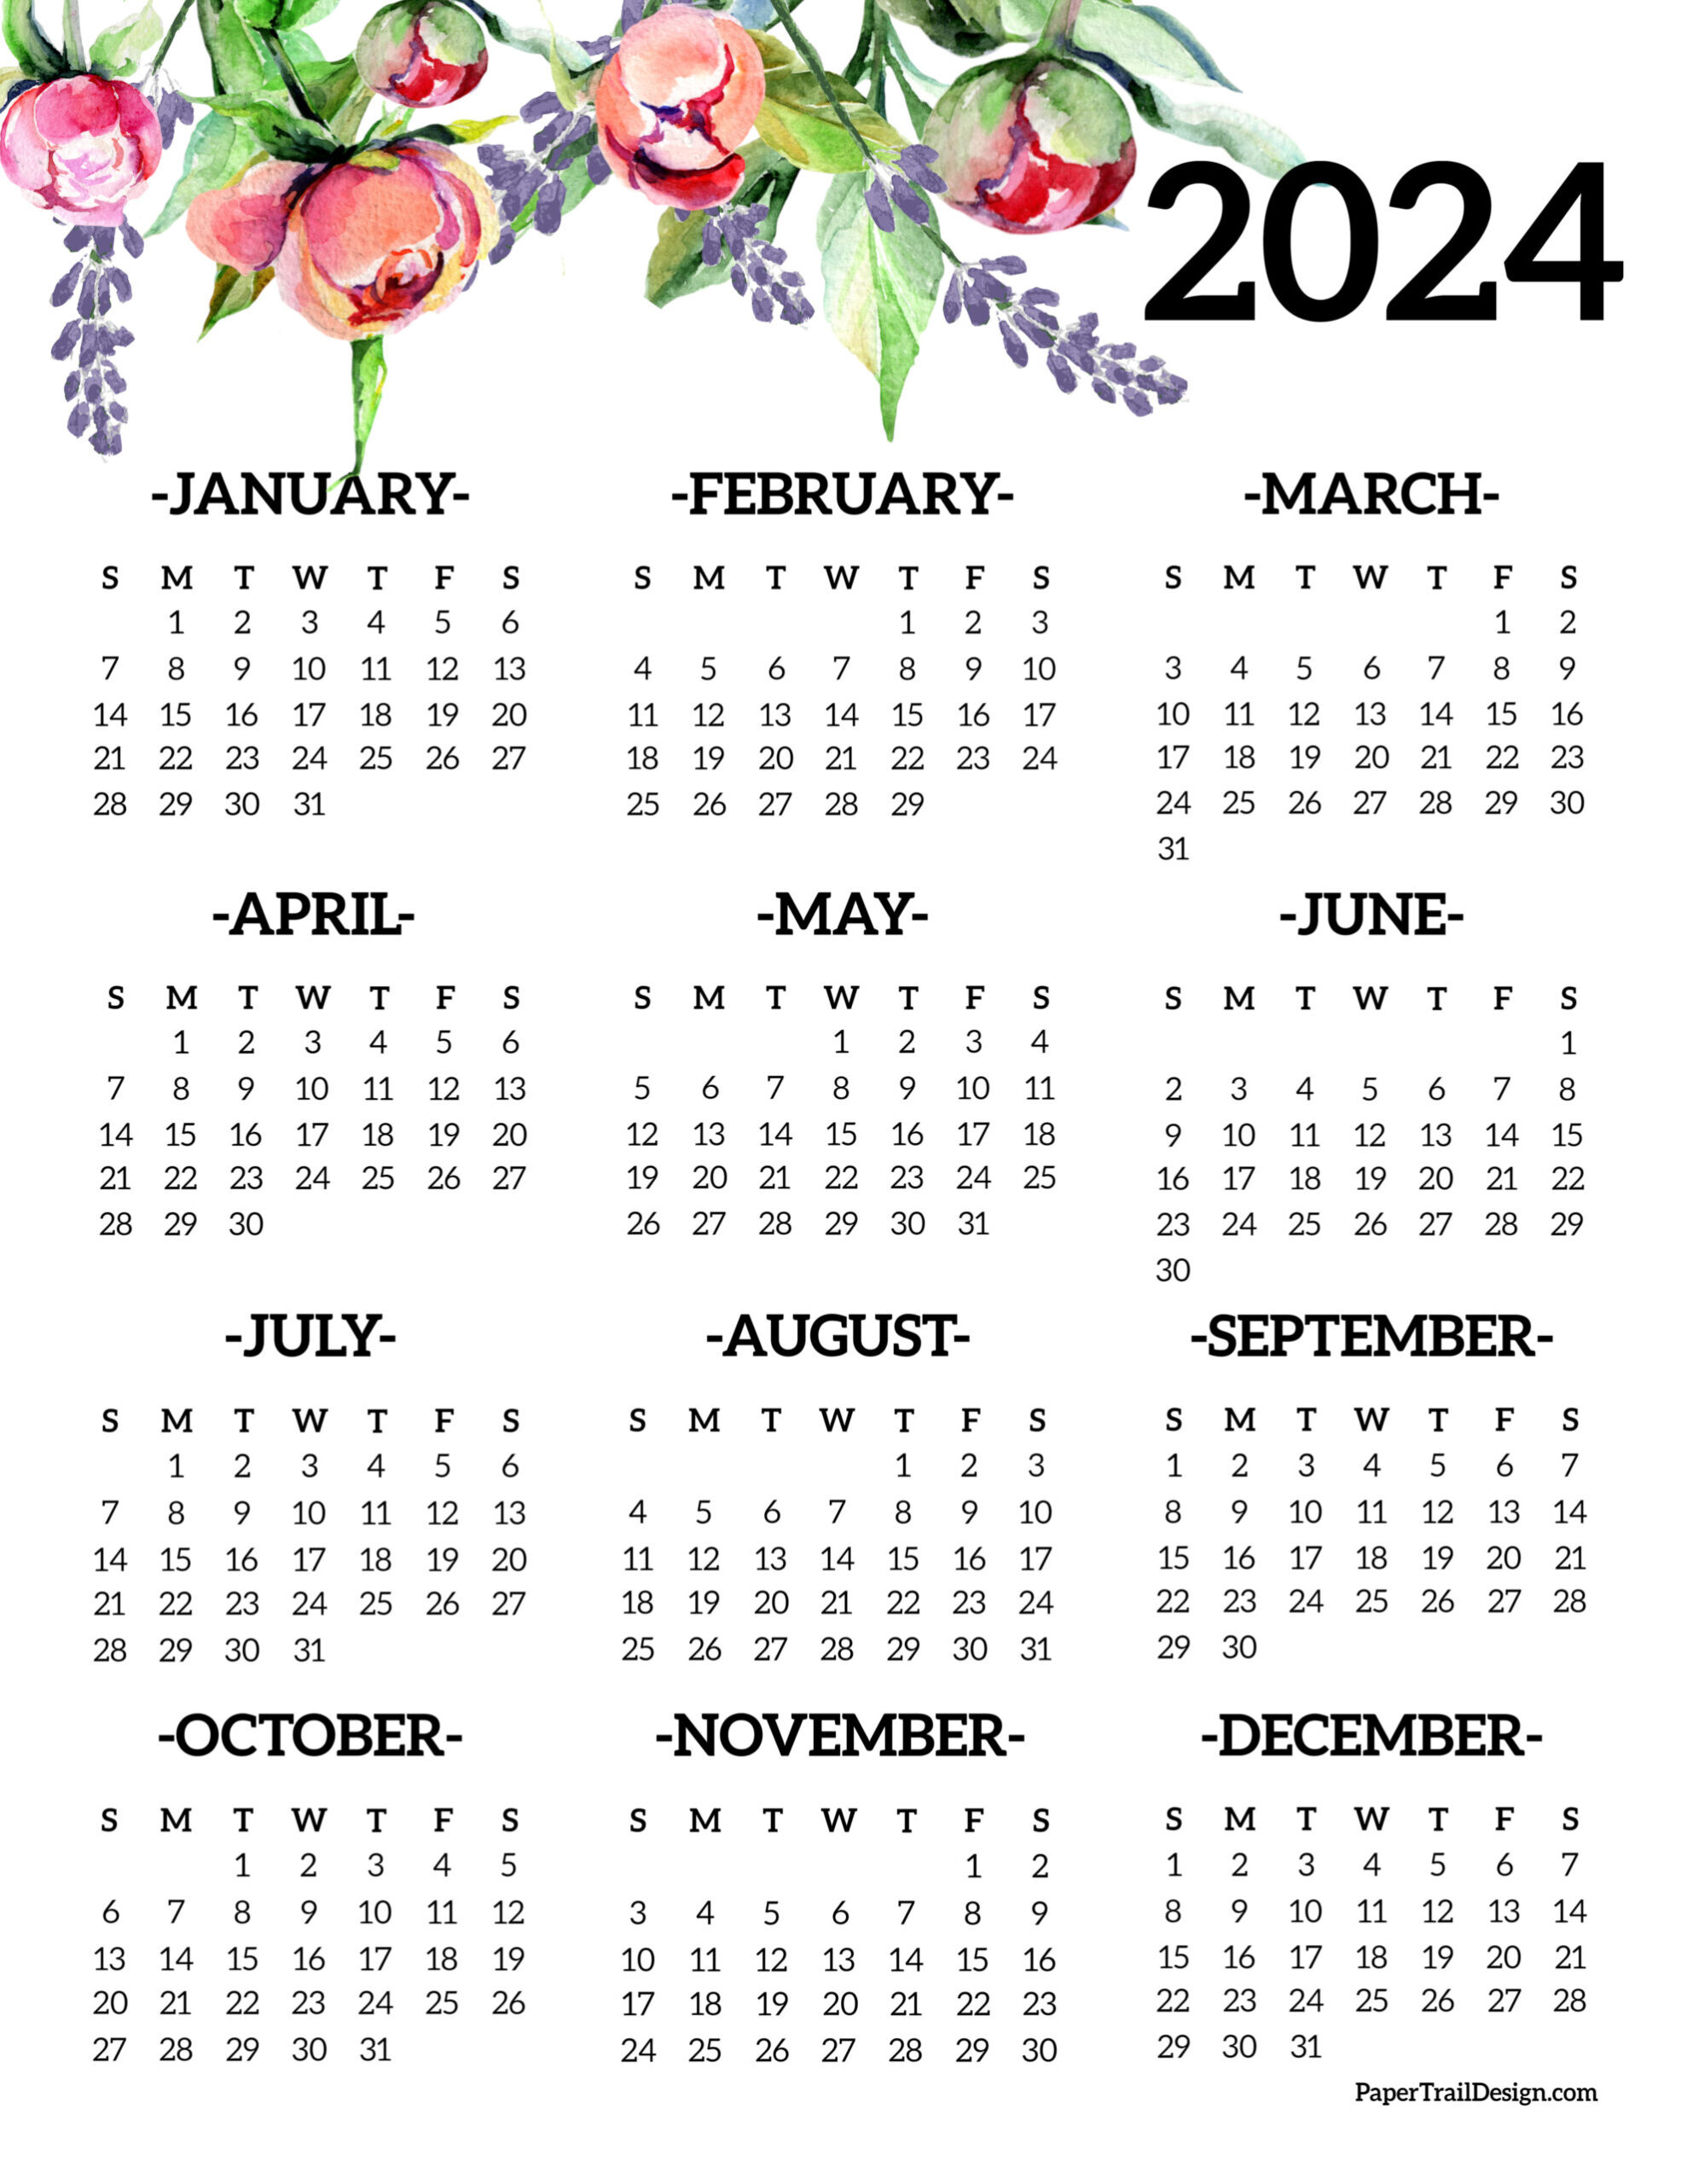 Calendar 2024 Printable One Page - Paper Trail Design for Single Page 2024 Calendar Printable